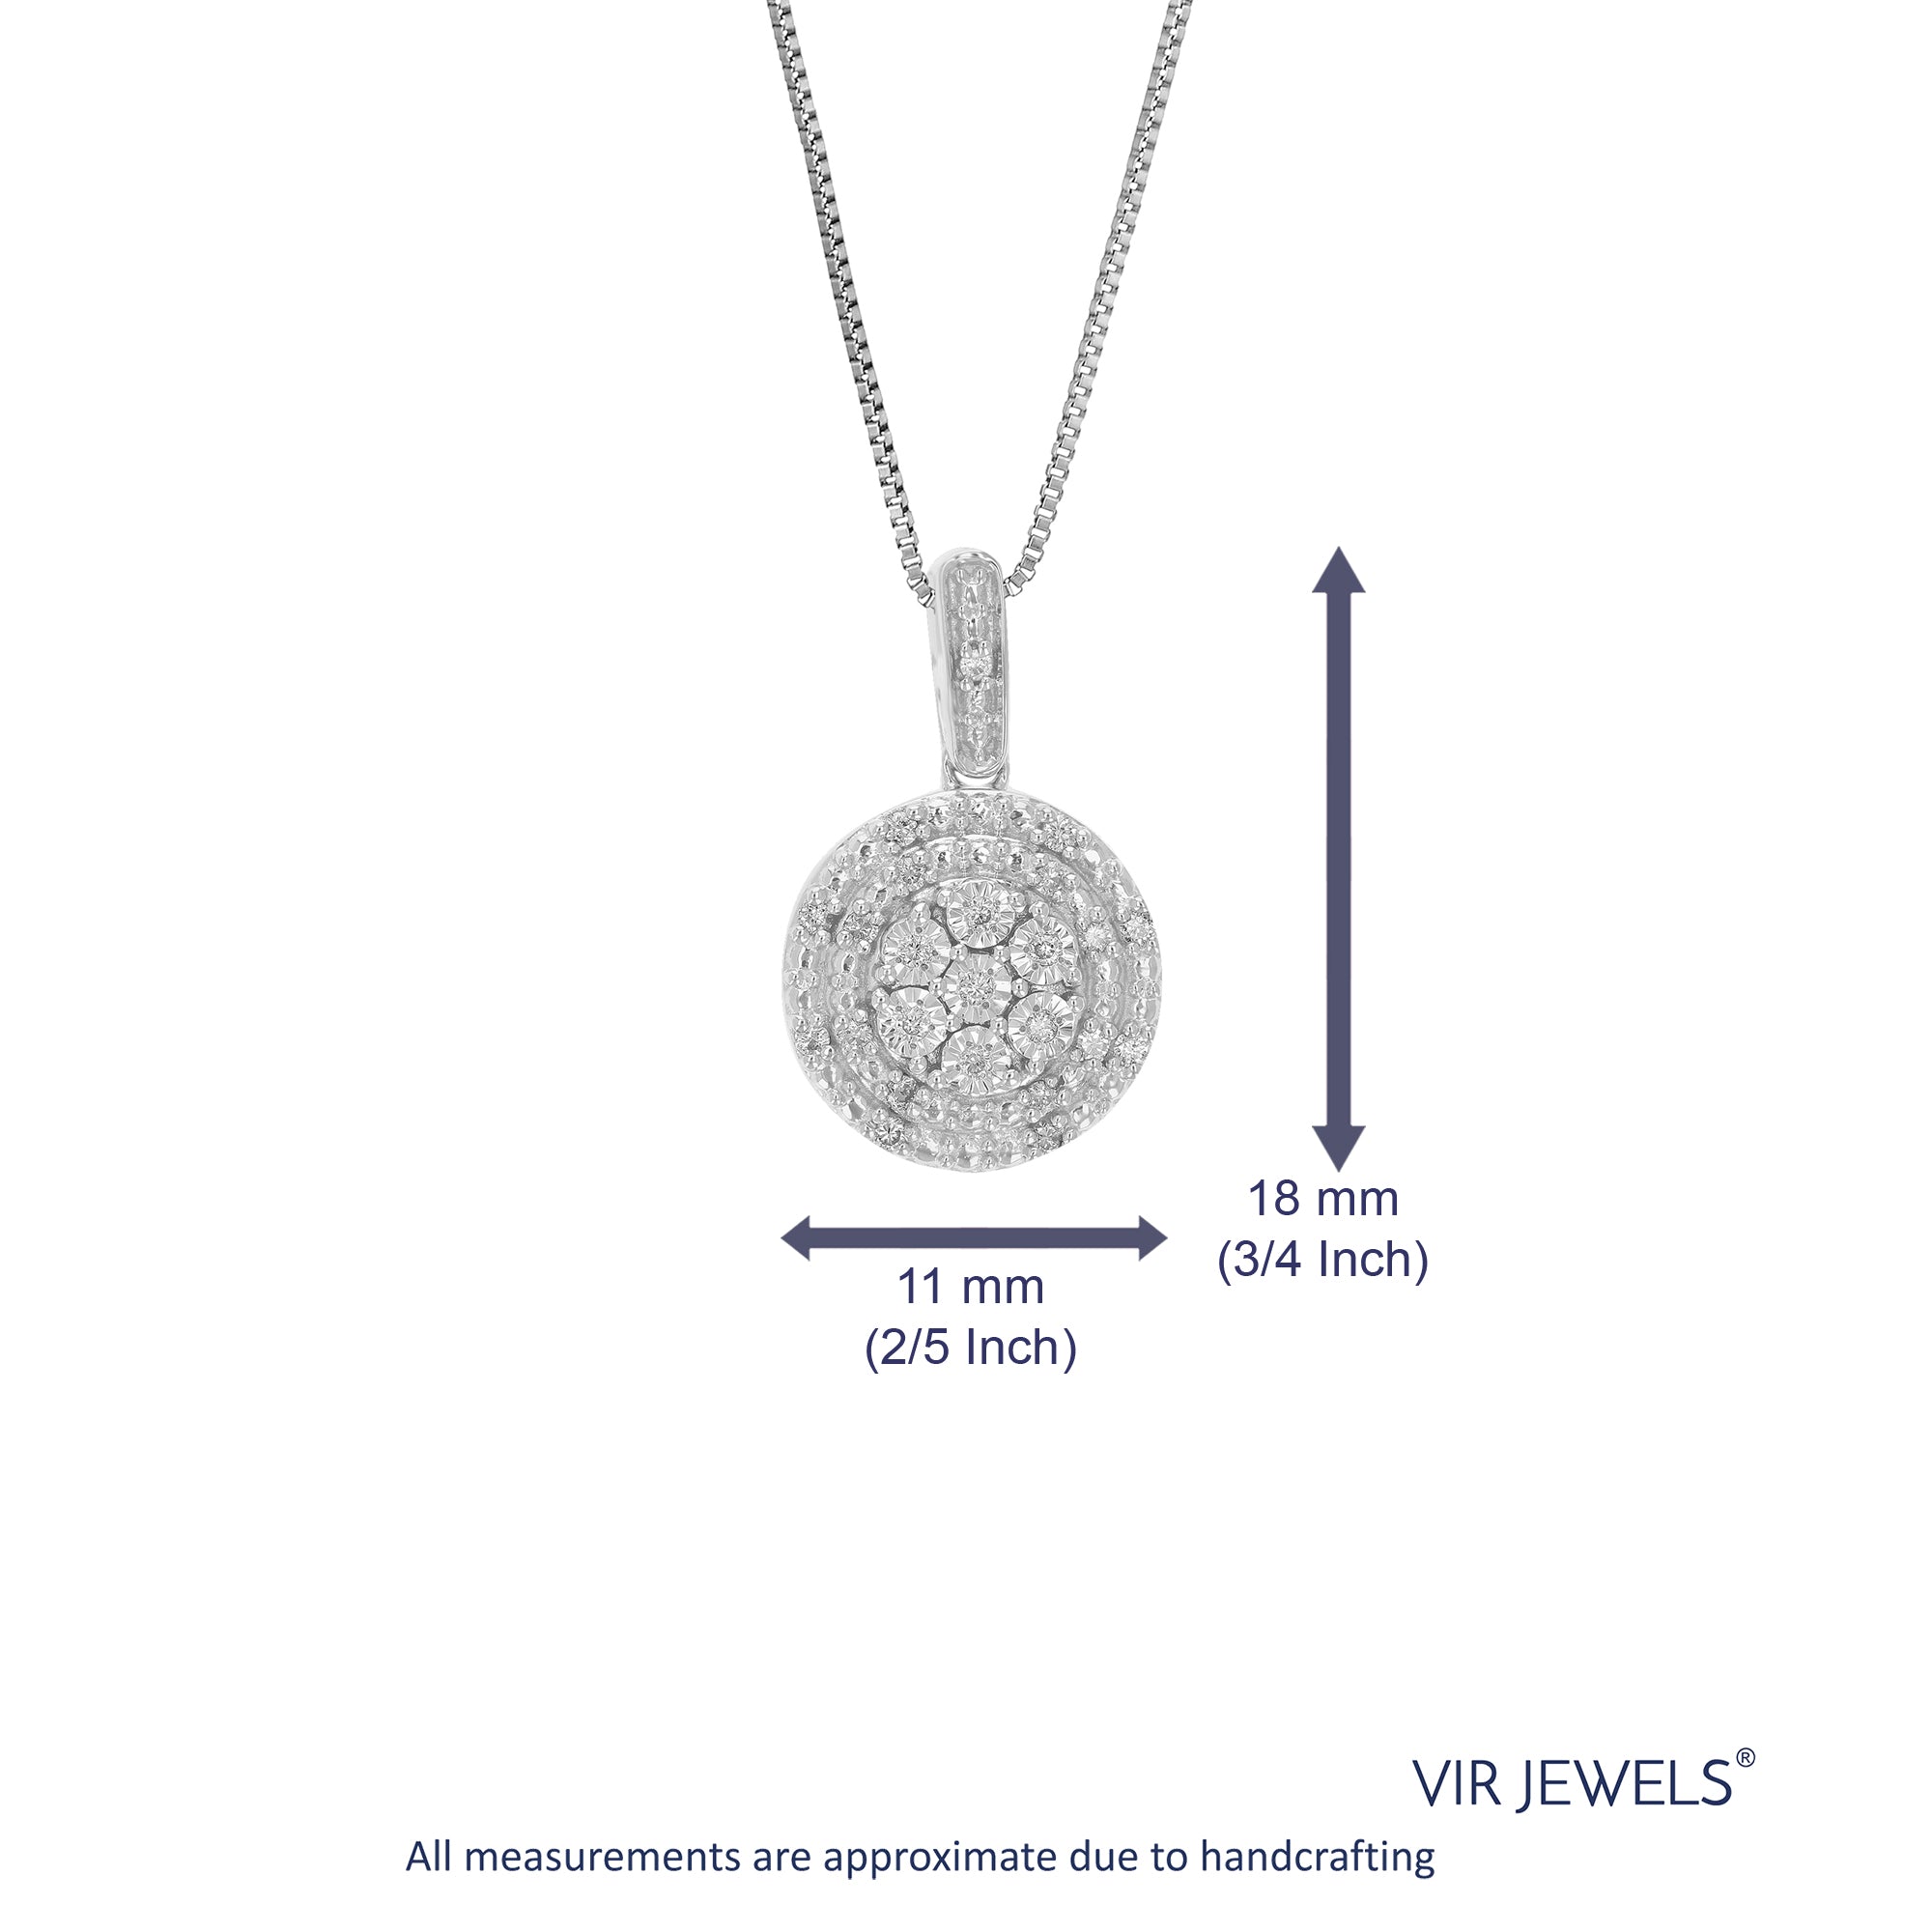 1/10 cttw Diamond Pendant Necklace for Women, Lab Grown Diamond Round Pendant Necklace in .925 Sterling Silver with Chain, Size 3/4 Inch